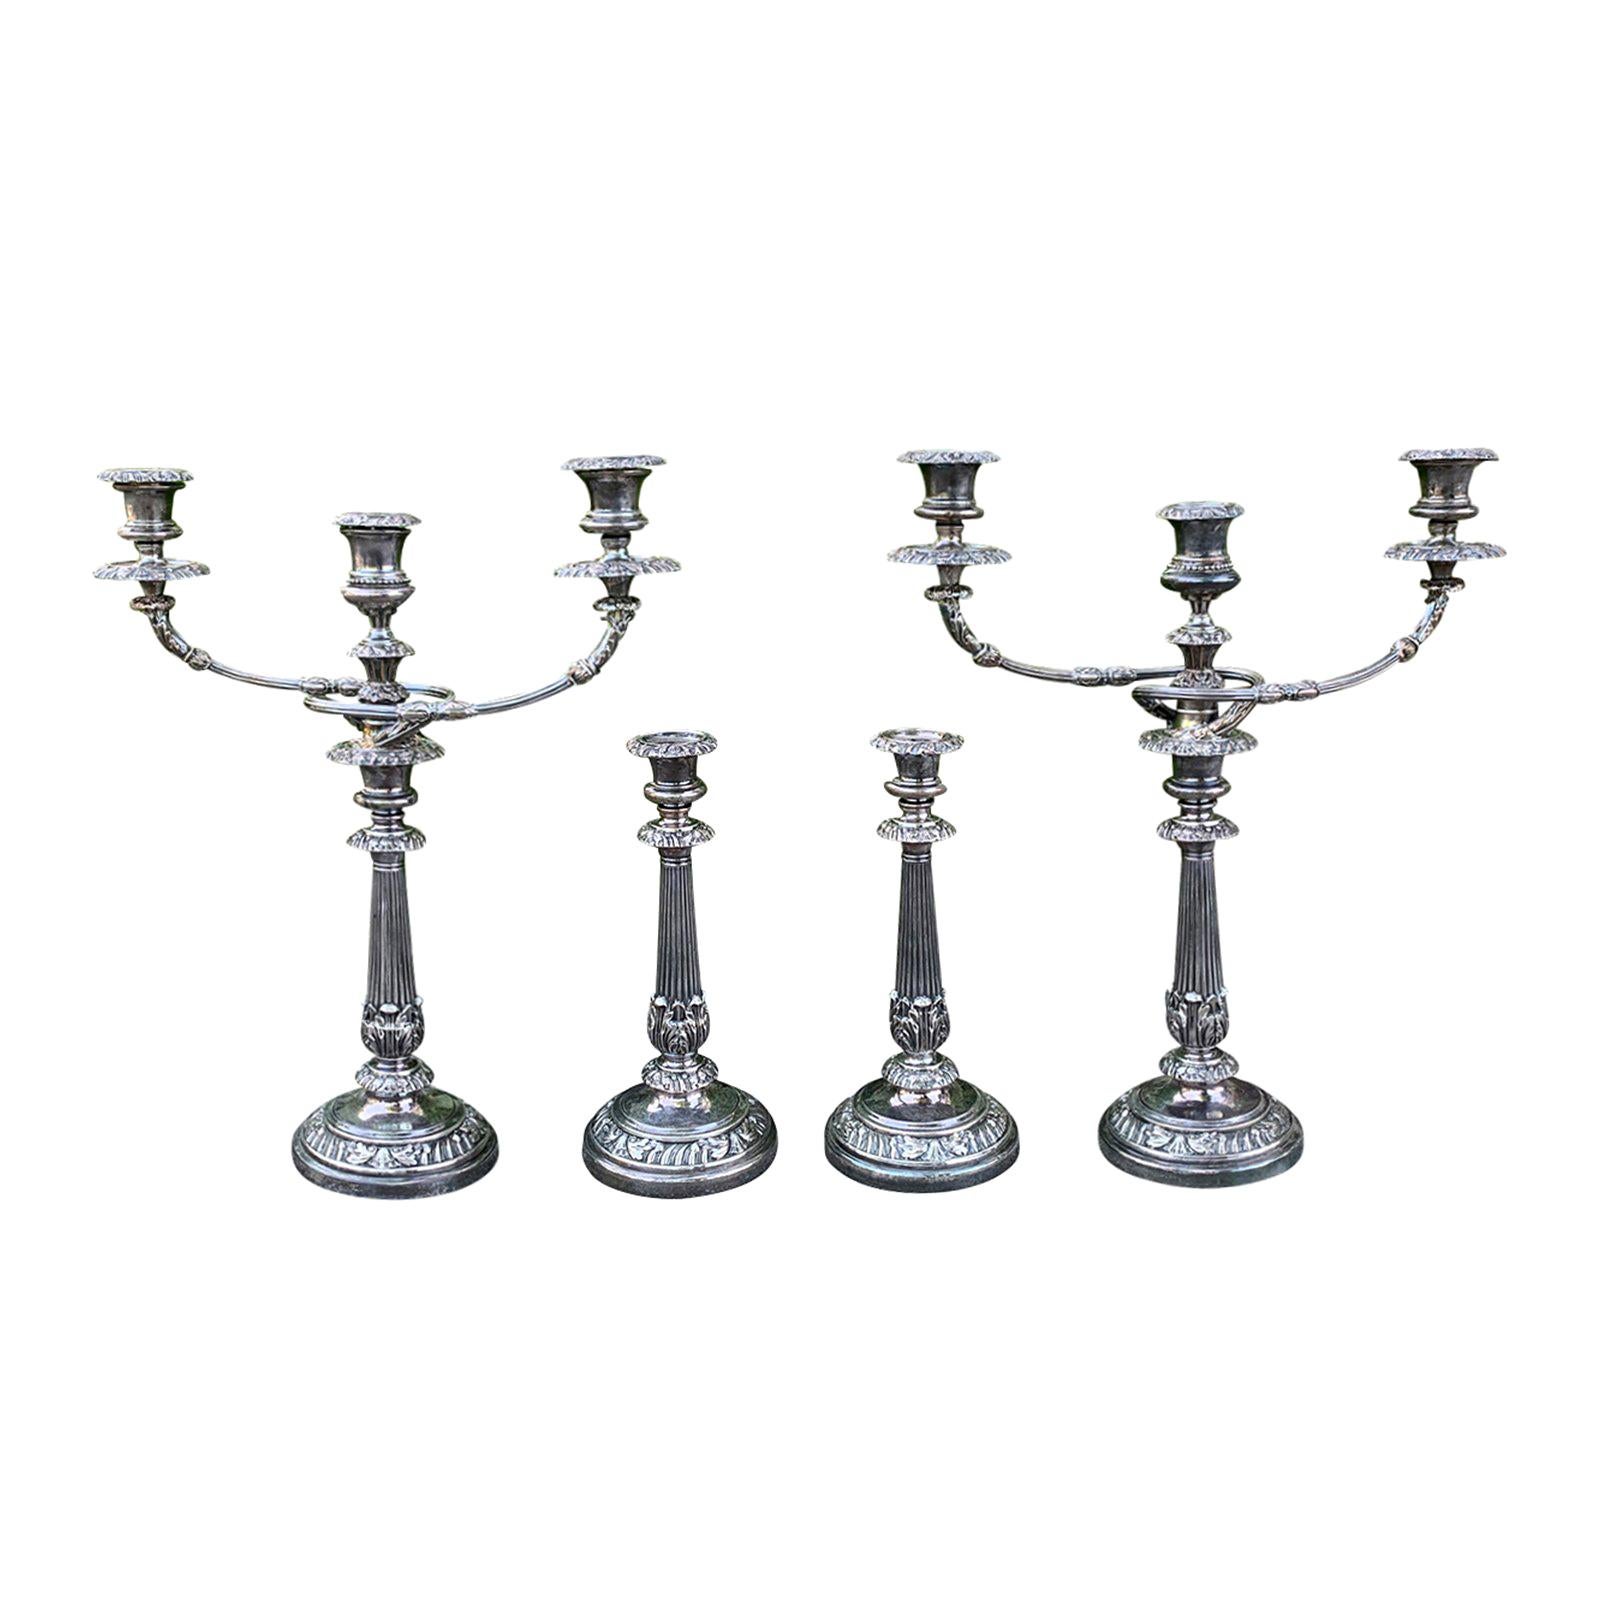 Set of Four Matthew Boulton Sheffield Plate Candlesticks and Candelabras, Marked